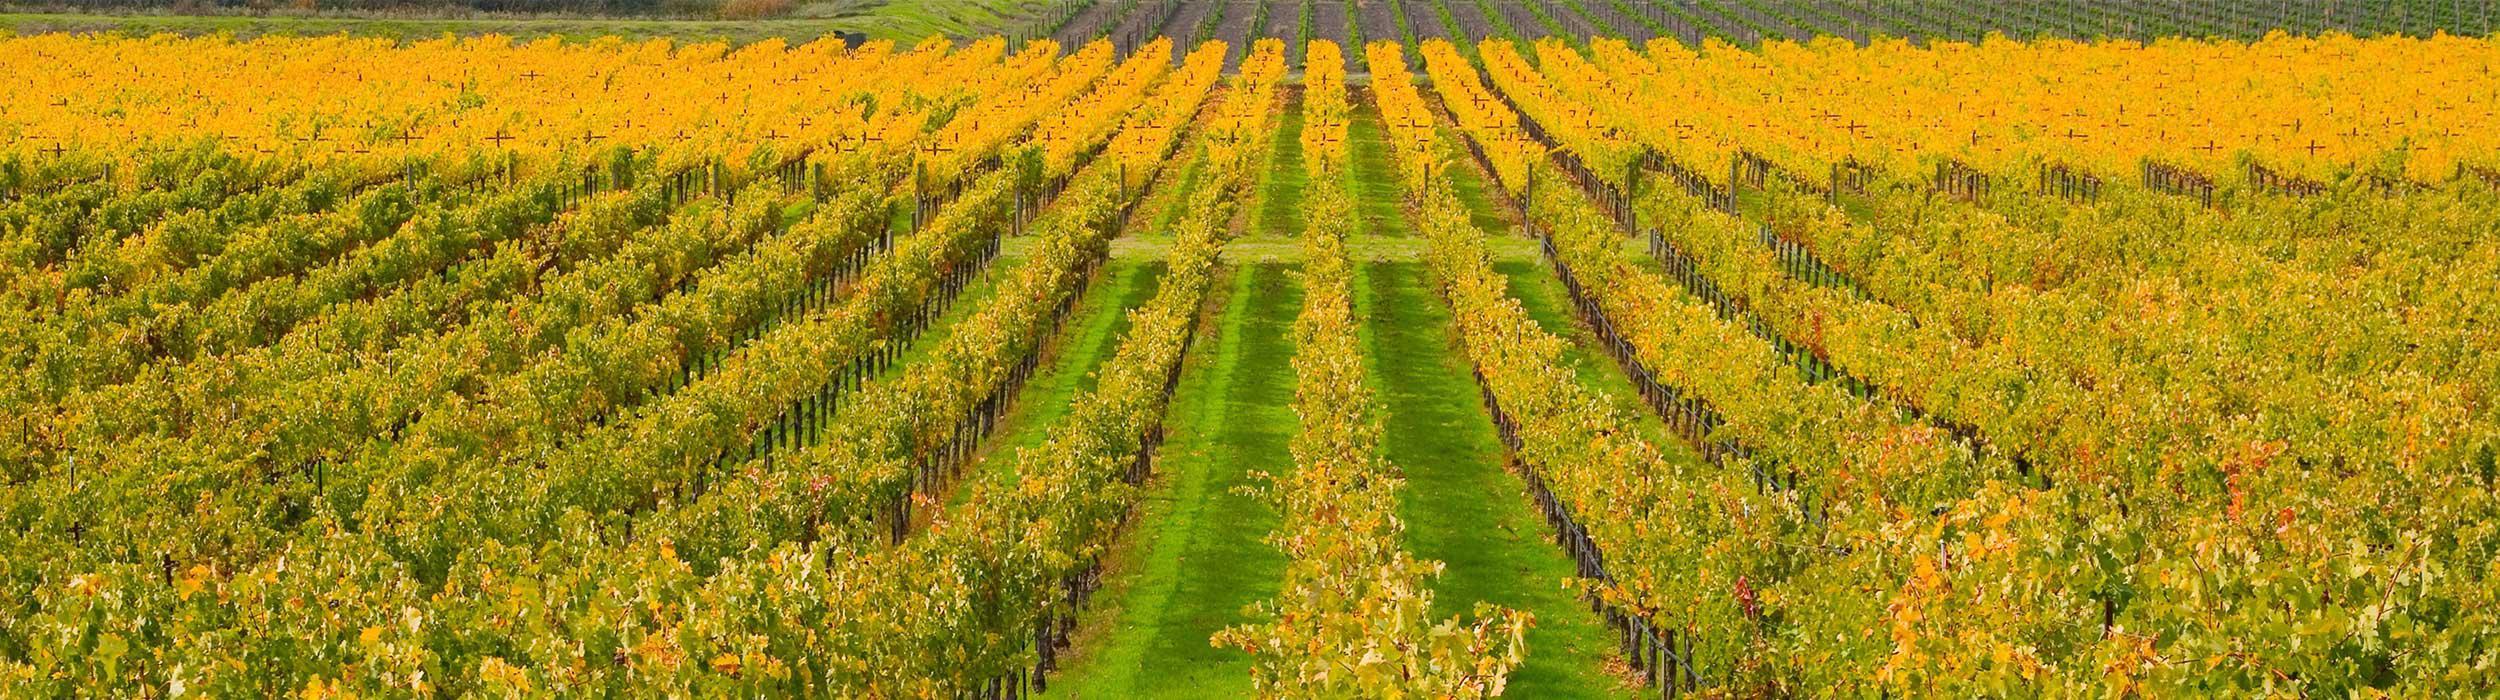 A vineyard field with yellow, Autumn colors.